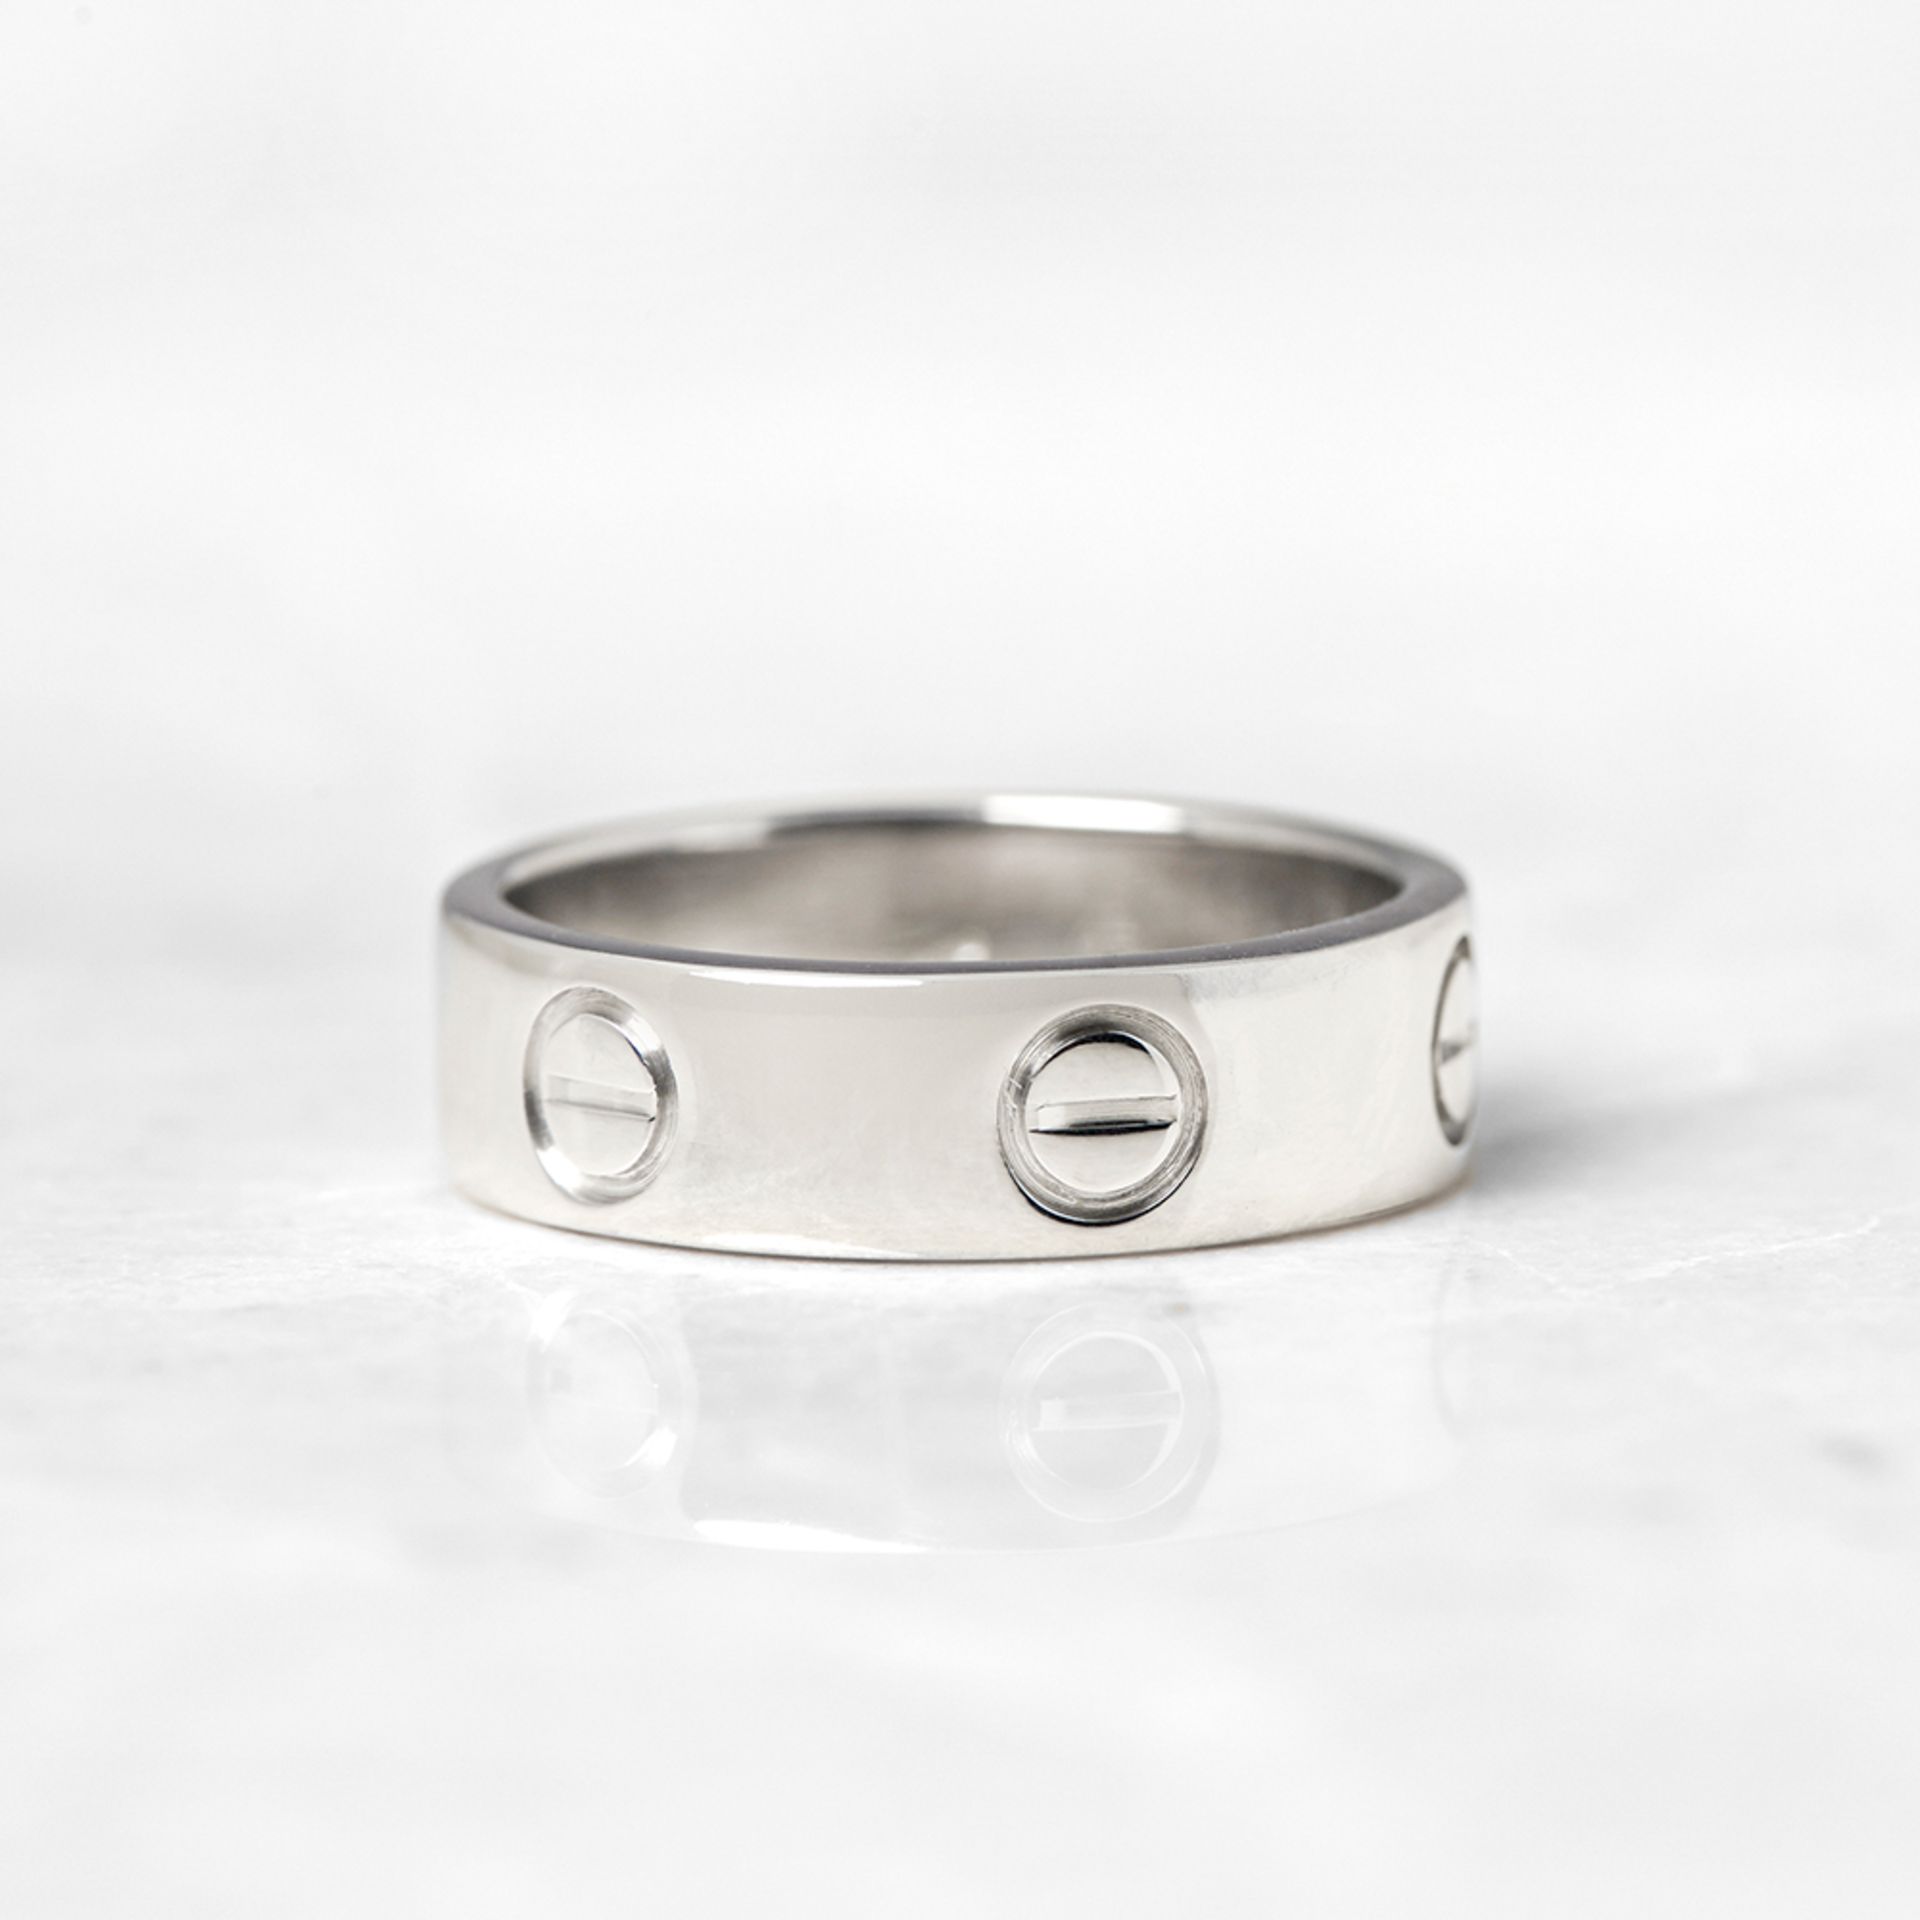 Cartier 18k White Gold Love Ring - Image 4 of 6